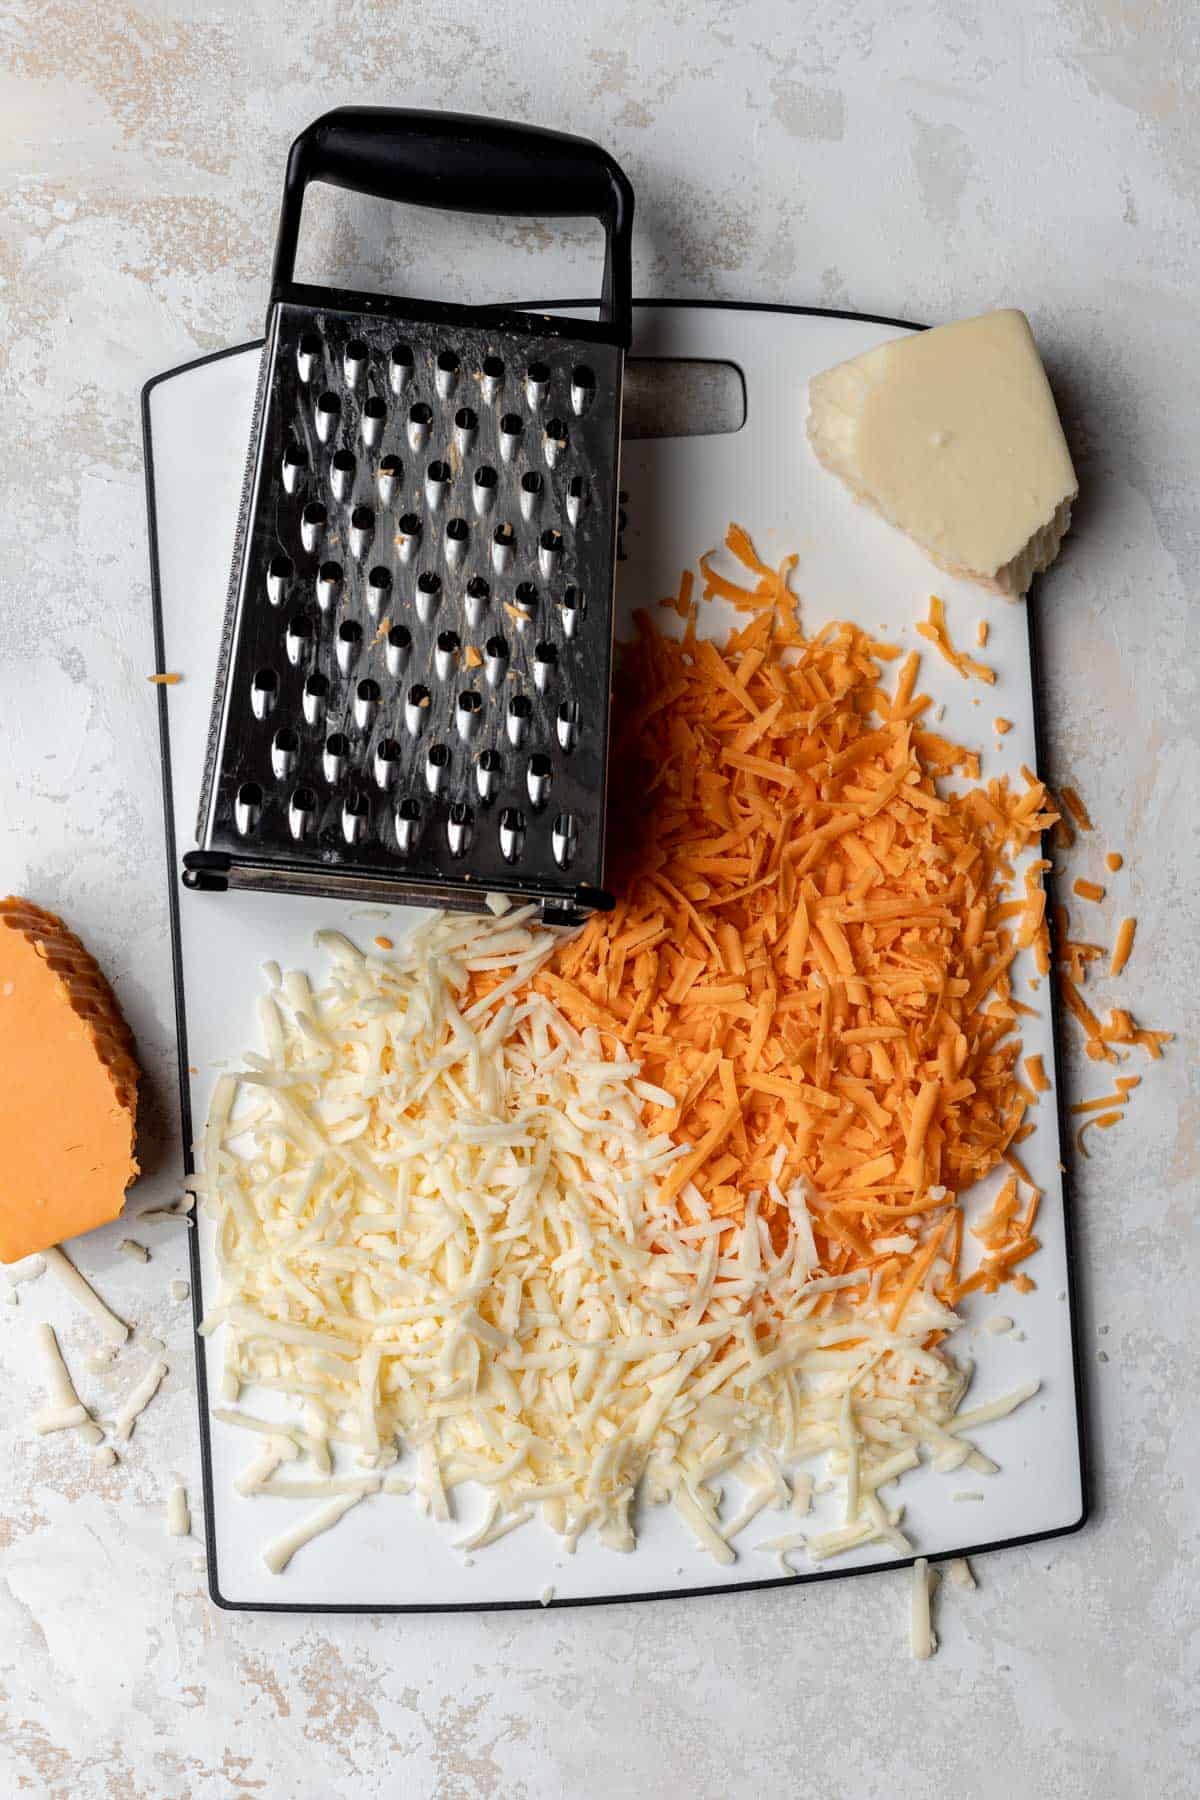 Shredded cheese on a cutting board with a box grater.